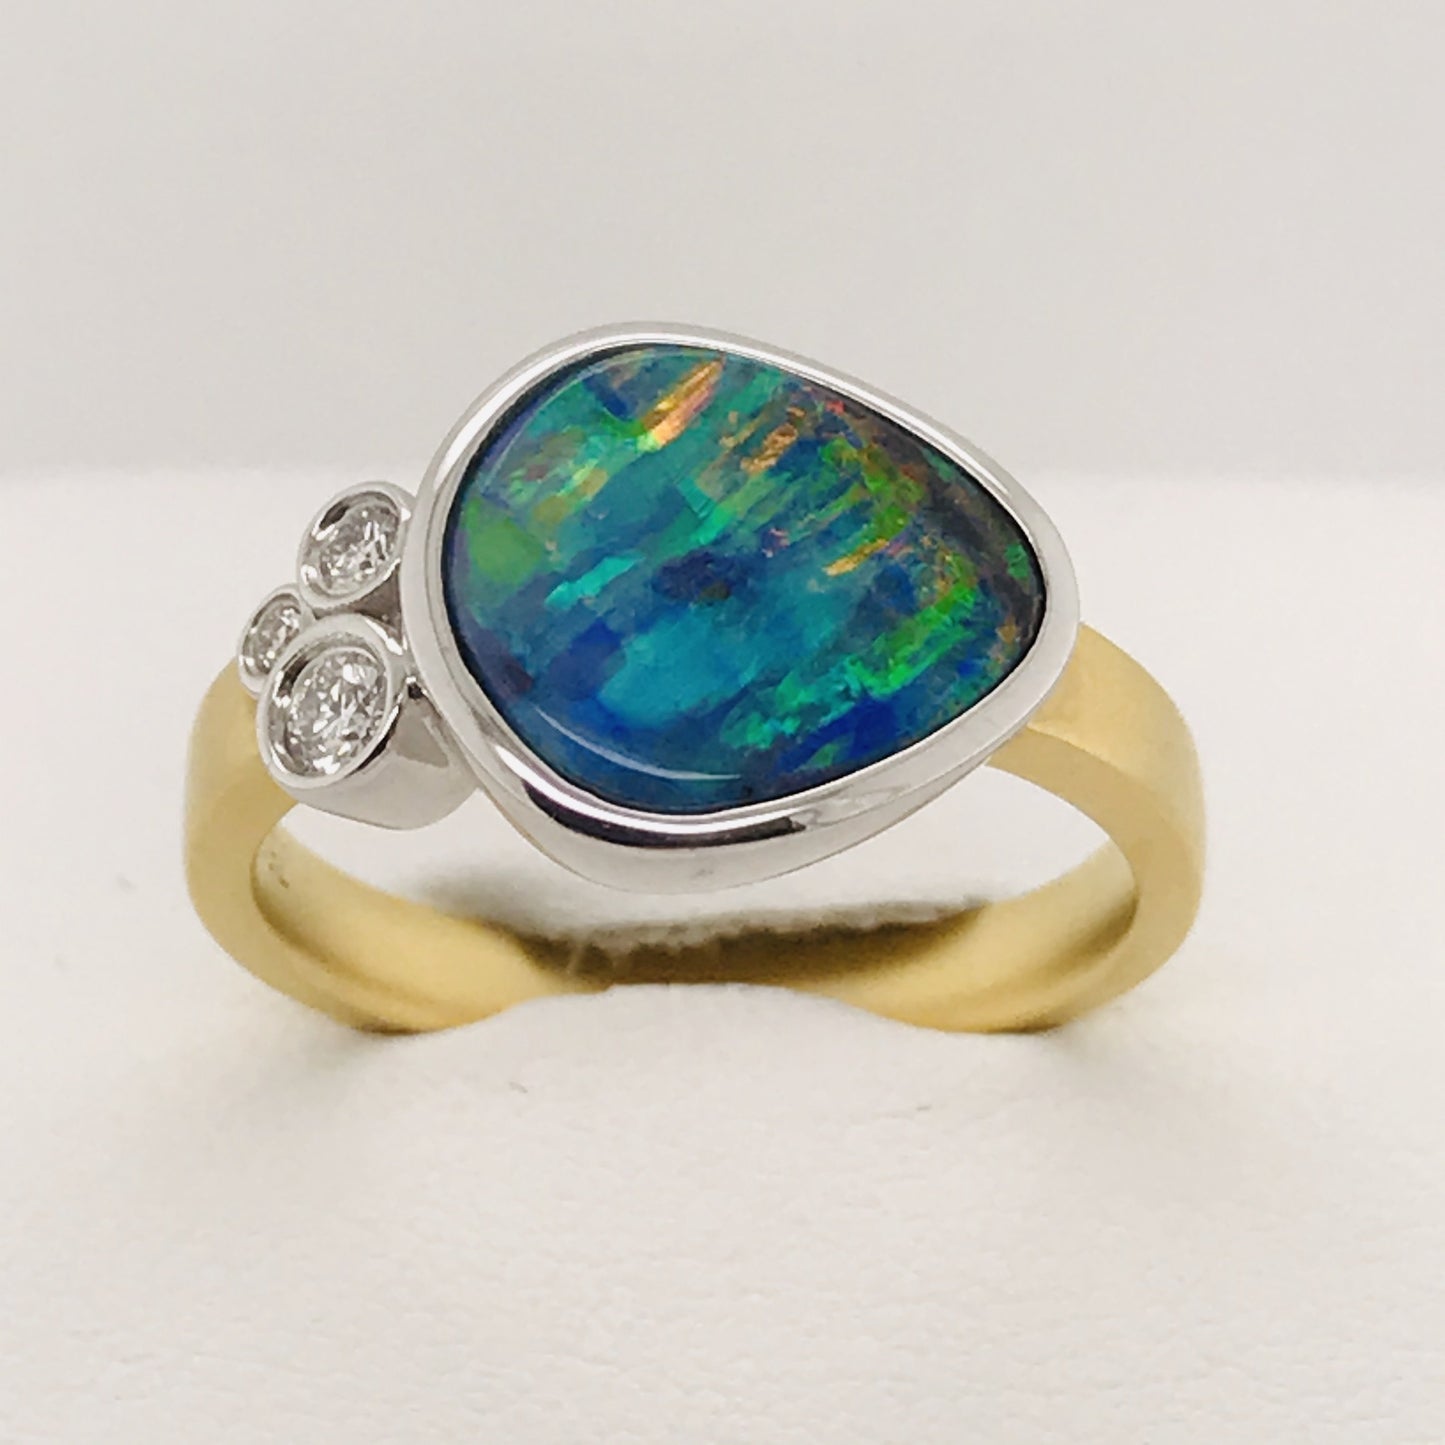 18K YG SOLID BOULDER OPAL AND DIAMOND RING